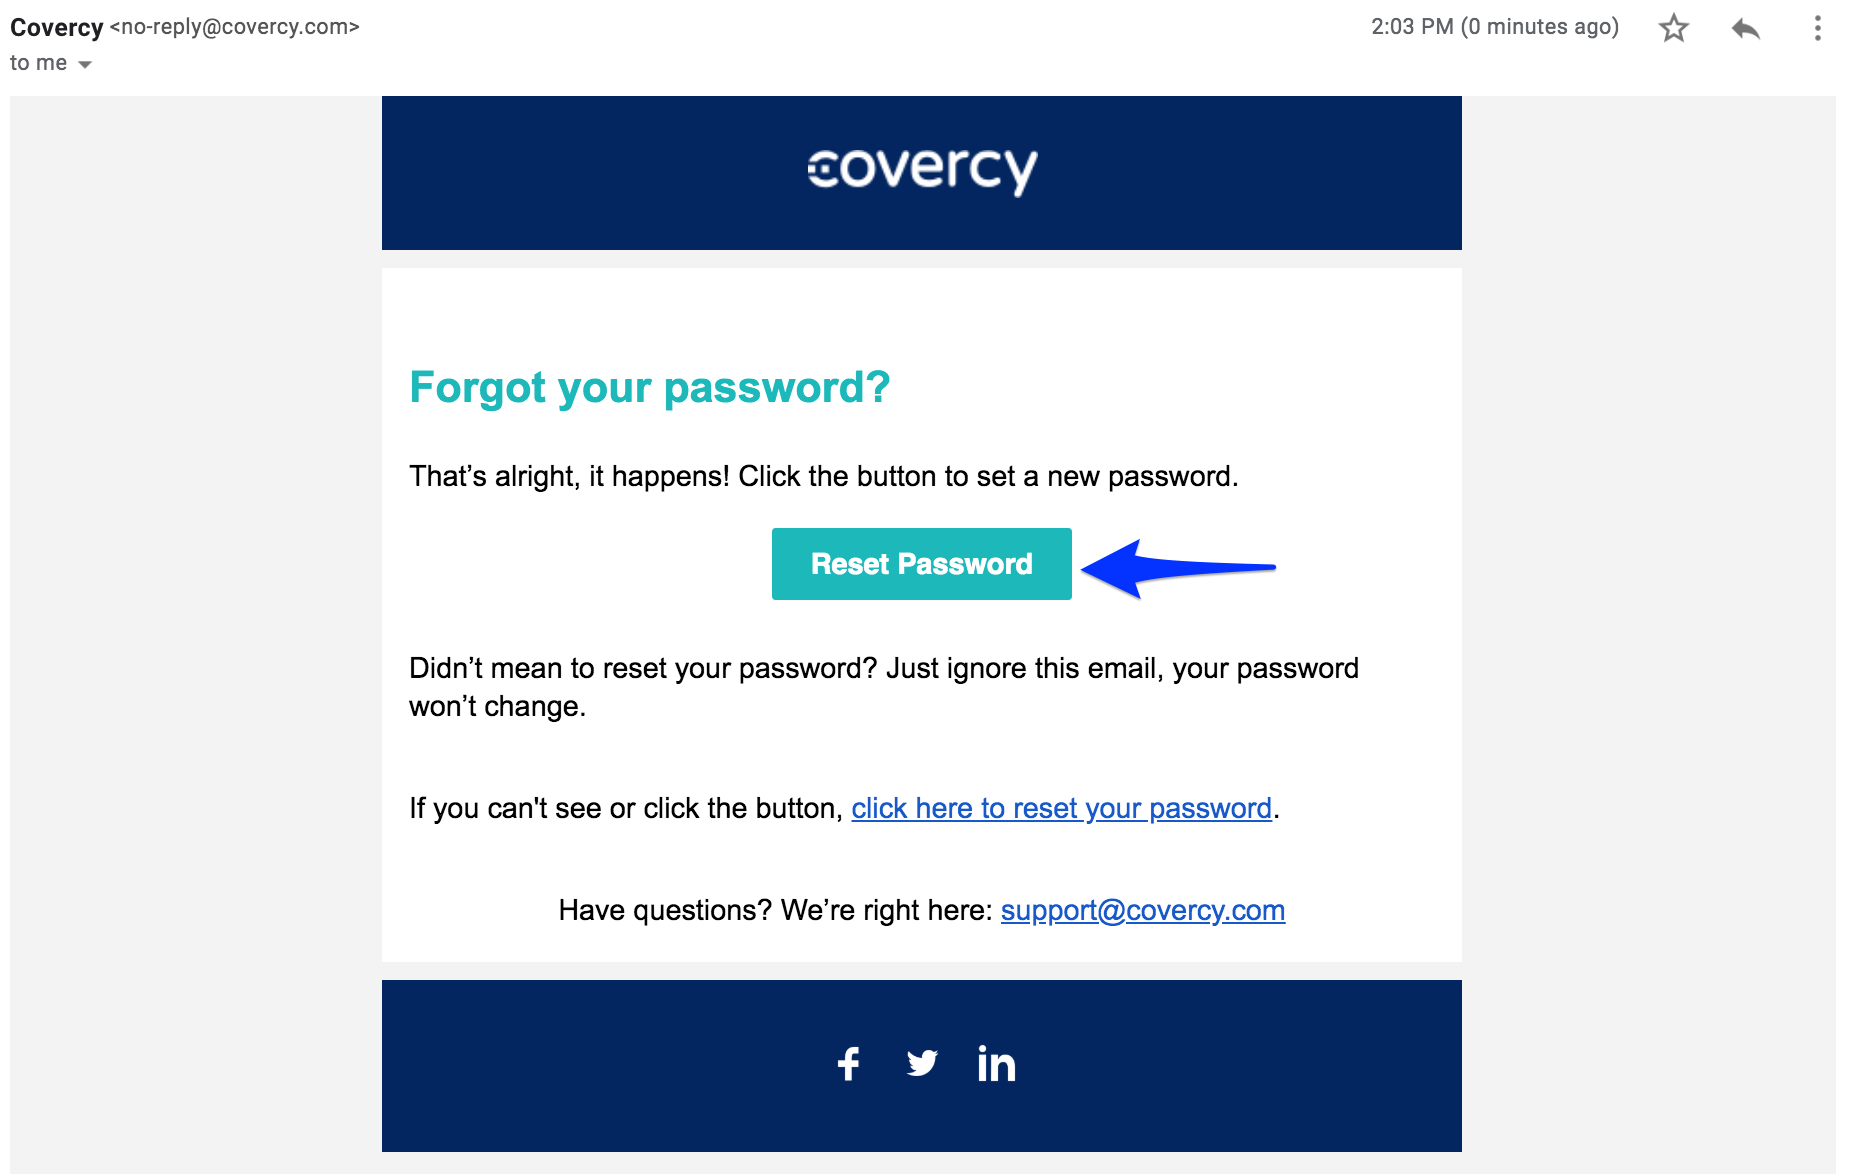 Reset_your_password__Mon__08_Apr_2019_11_03_35_GMT__-_annie_midence_covercy_com_-_Covercy_Mail